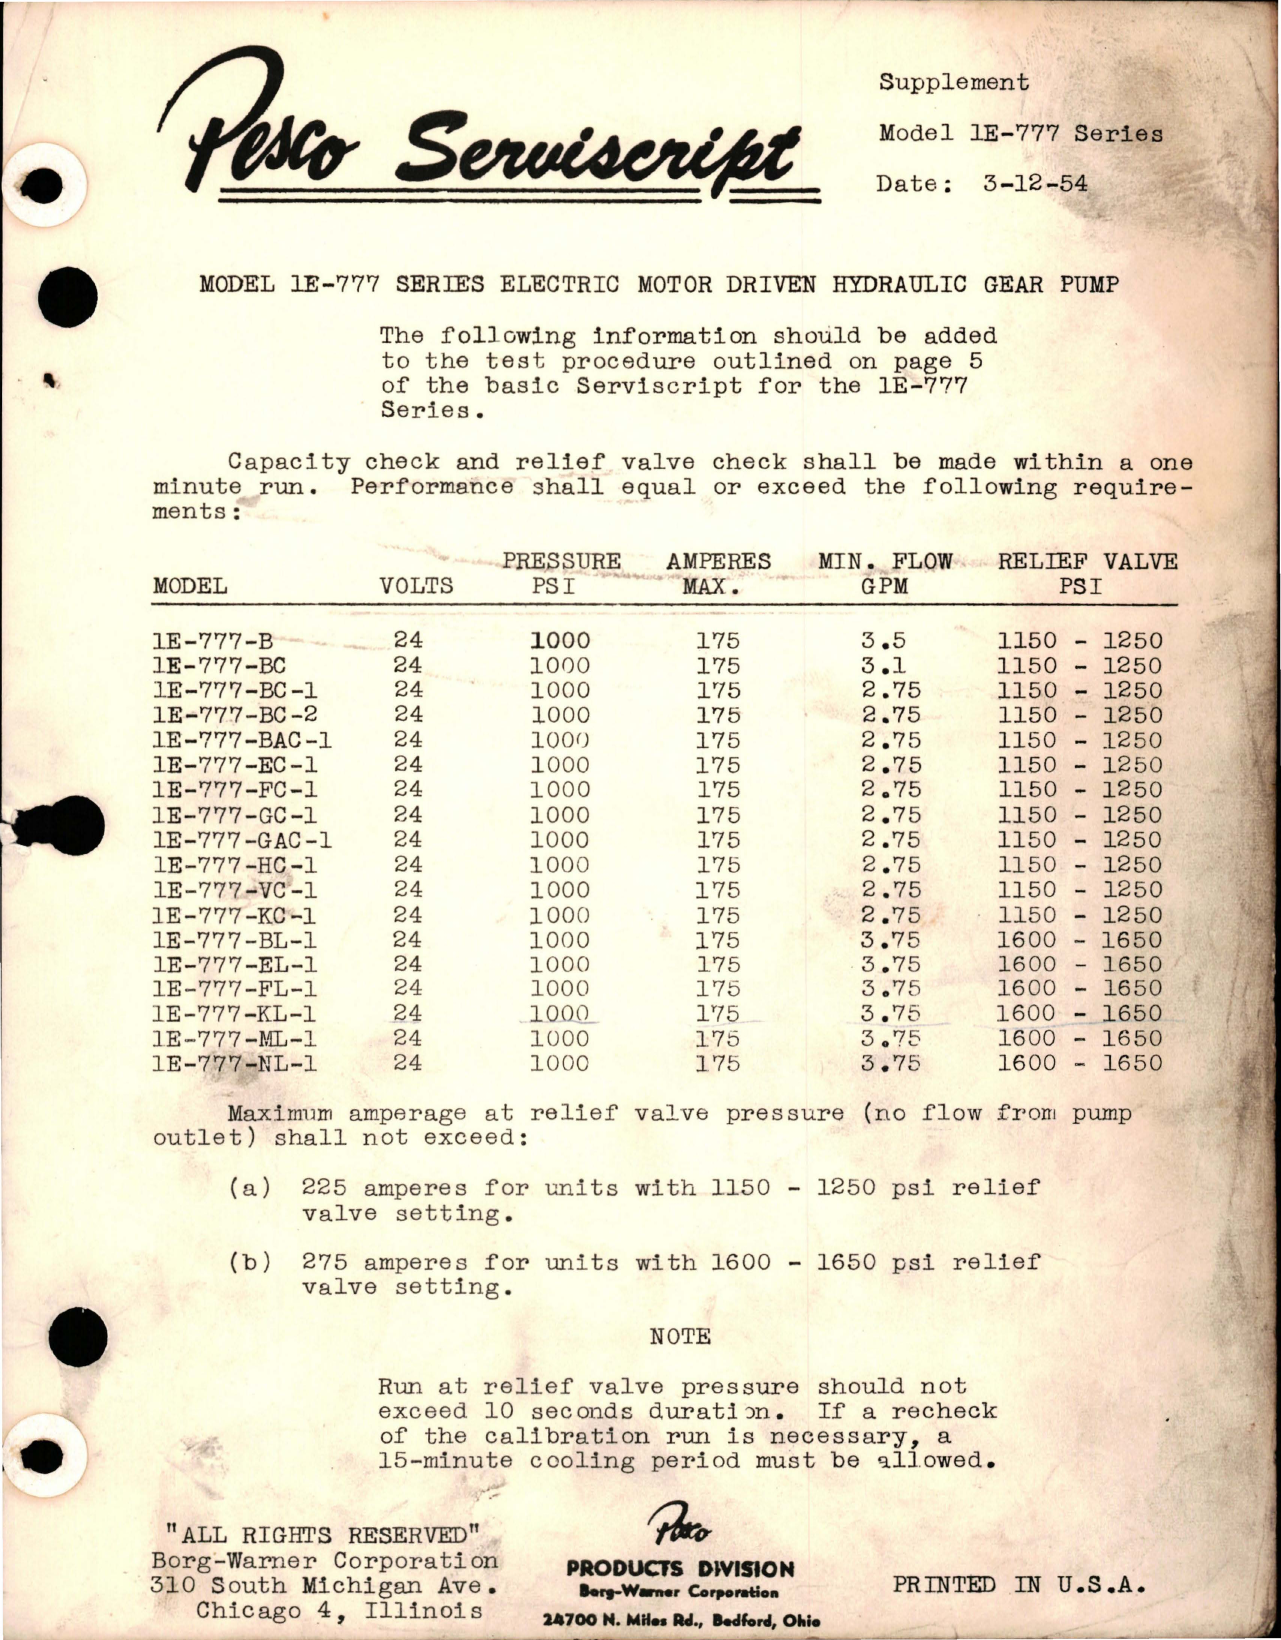 Sample page 1 from AirCorps Library document: Pesco Serviscript Supplement - Model 1E-777 Series Electric Motor Driven Hydraulic Gear Pump